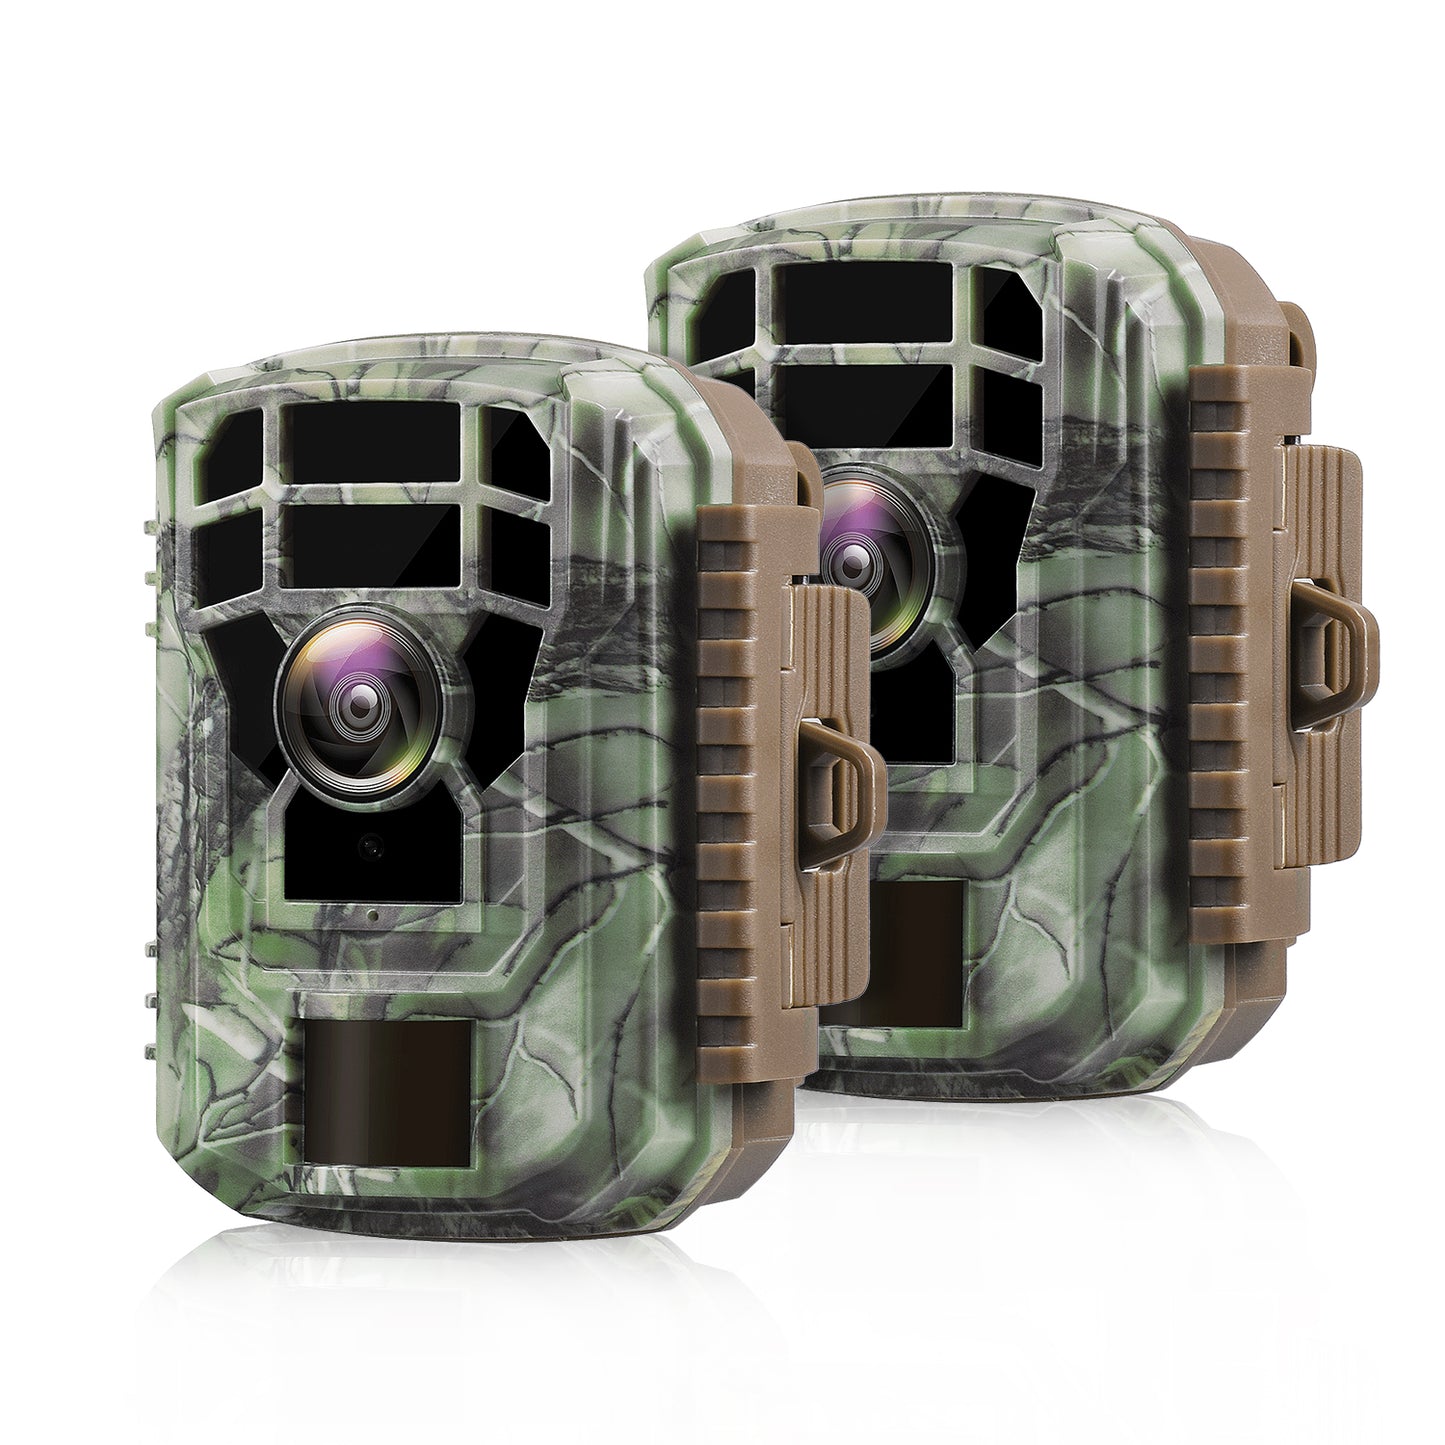 CAMPARK 2 PACK Mini Trail Camera 16MP 1080P HD Hunting Deer Game Camera Waterproof Wildlife Scouting Trail Cam with 120° Wide Angle Lens and Night Vision 2.0" LCD IR LEDs